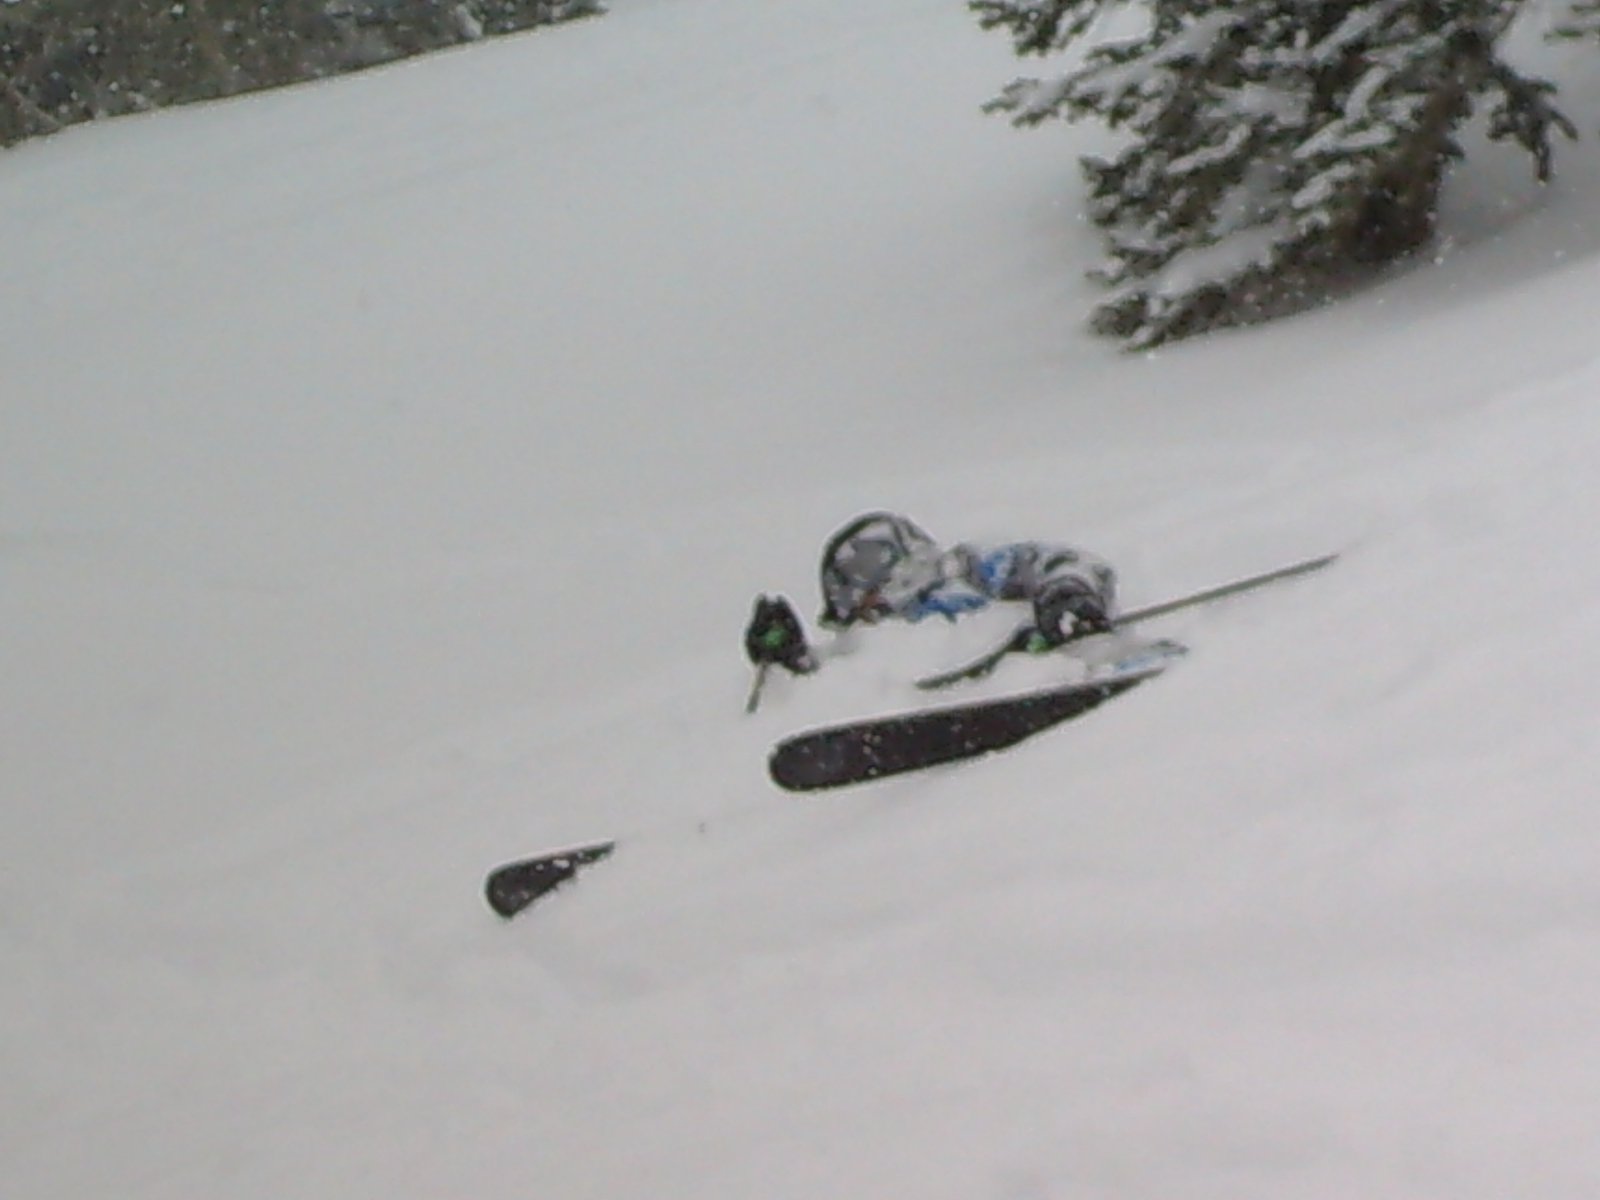 Took a nap and 3 feet of powder